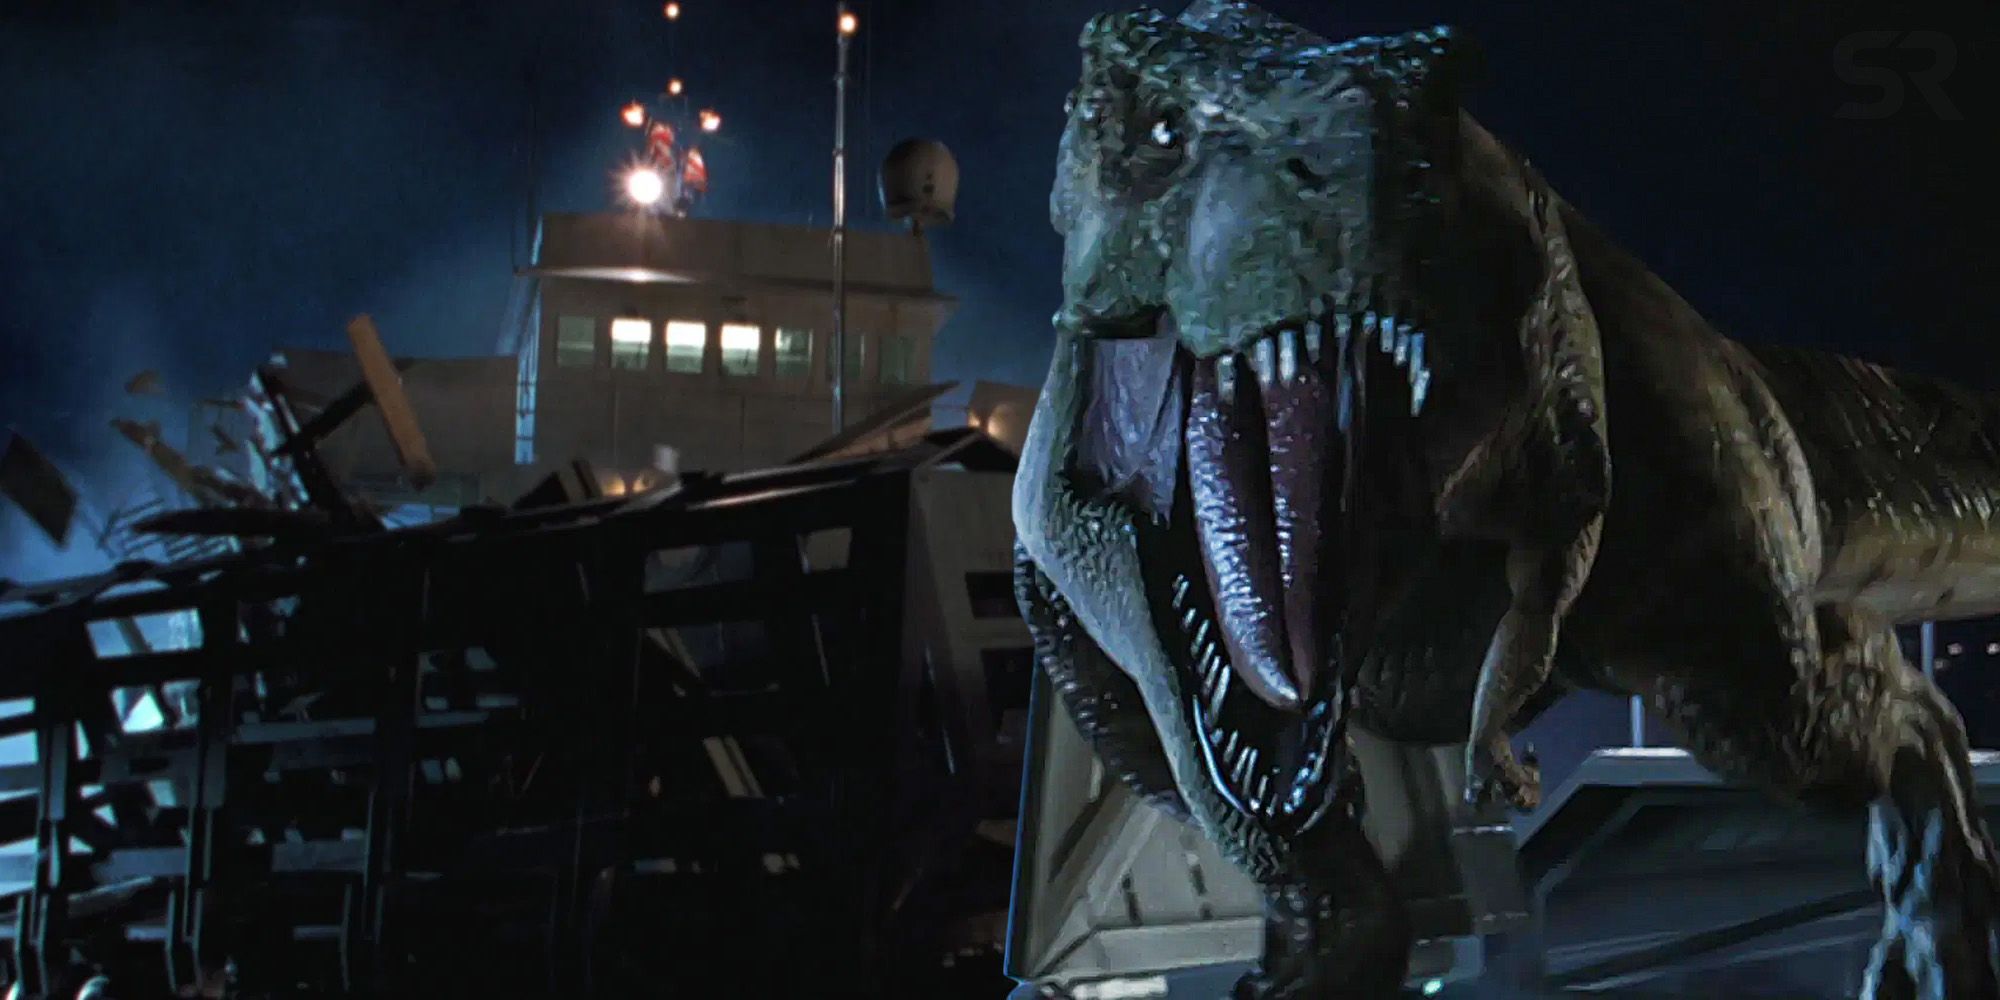 A T-Rex in Jurassic Park: The Lost World